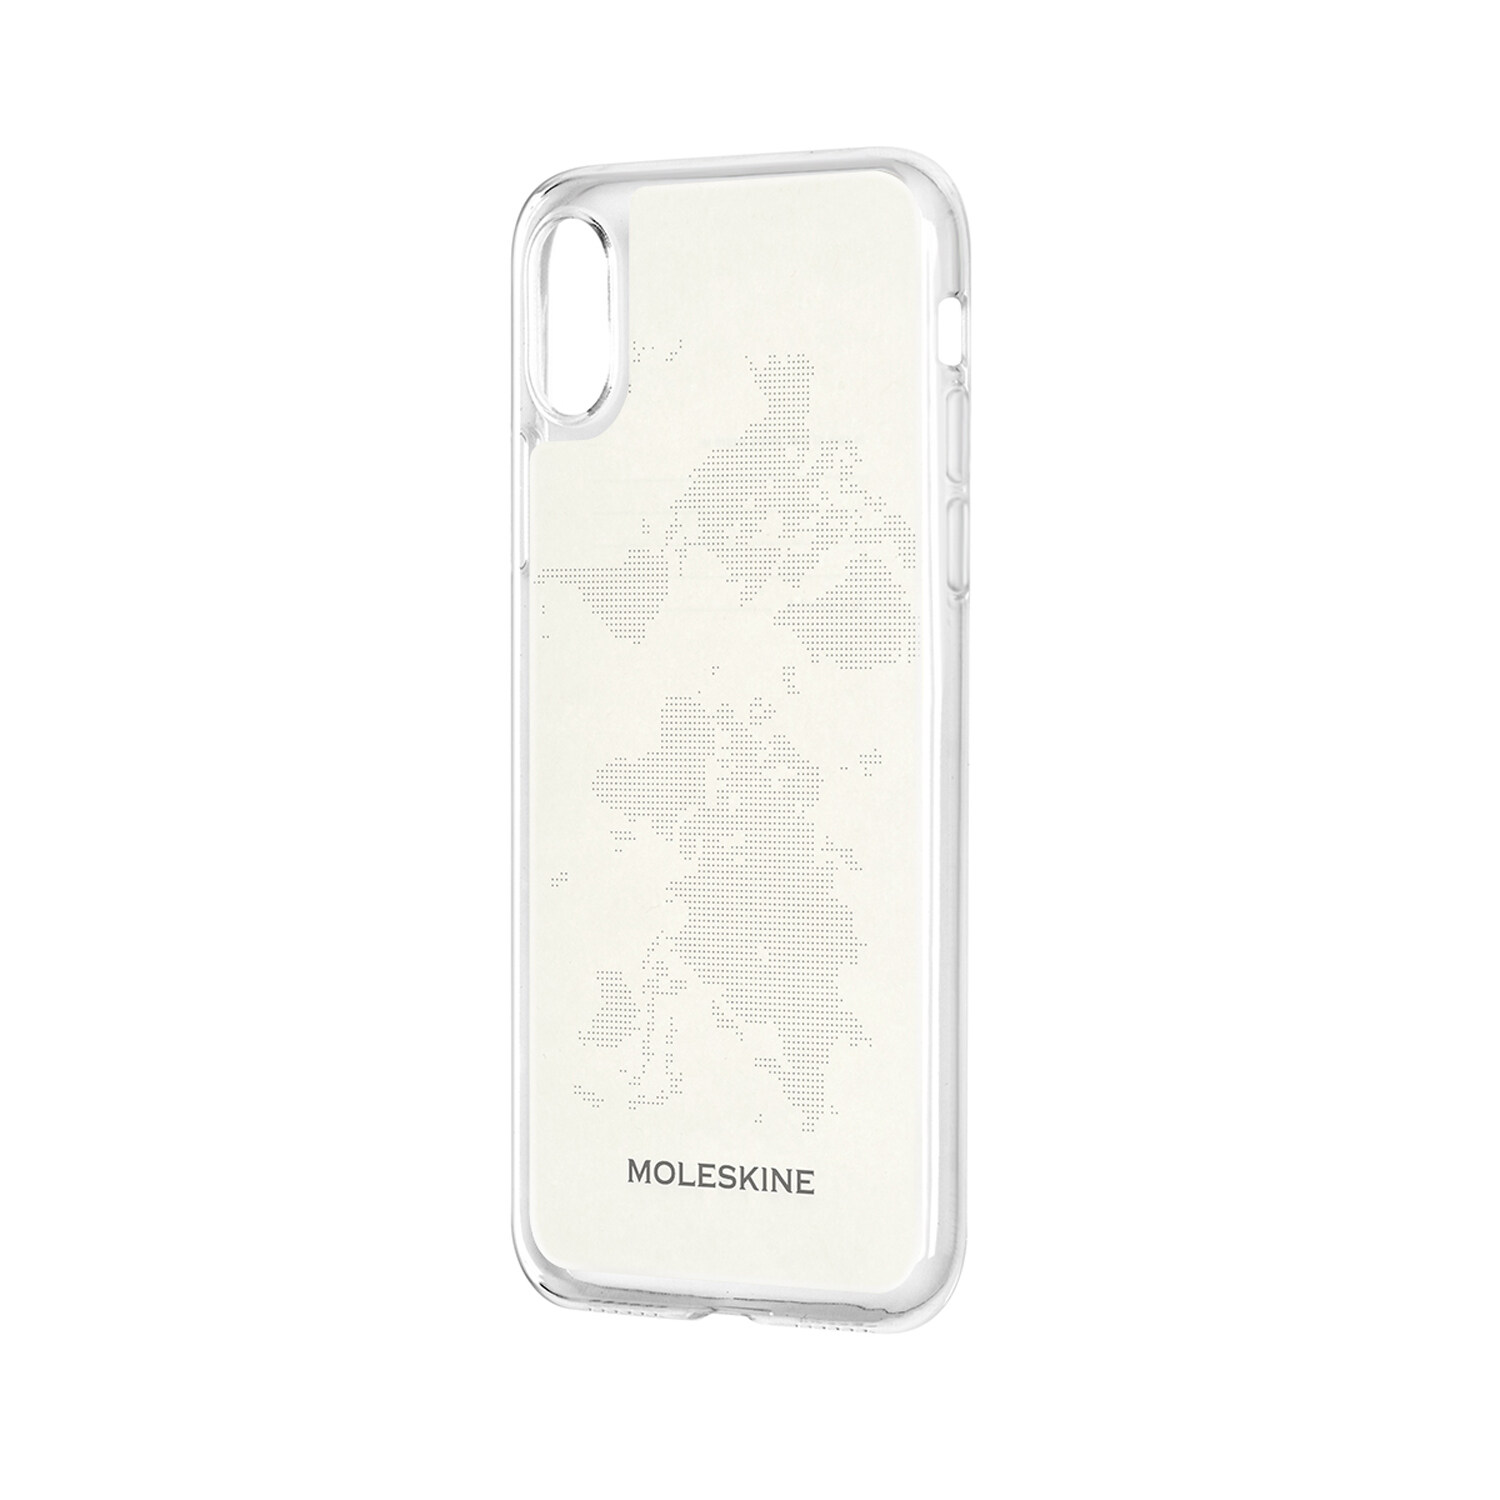 Moleskine Clear Case with Paper Templates iPhone XR (General Merchandise)